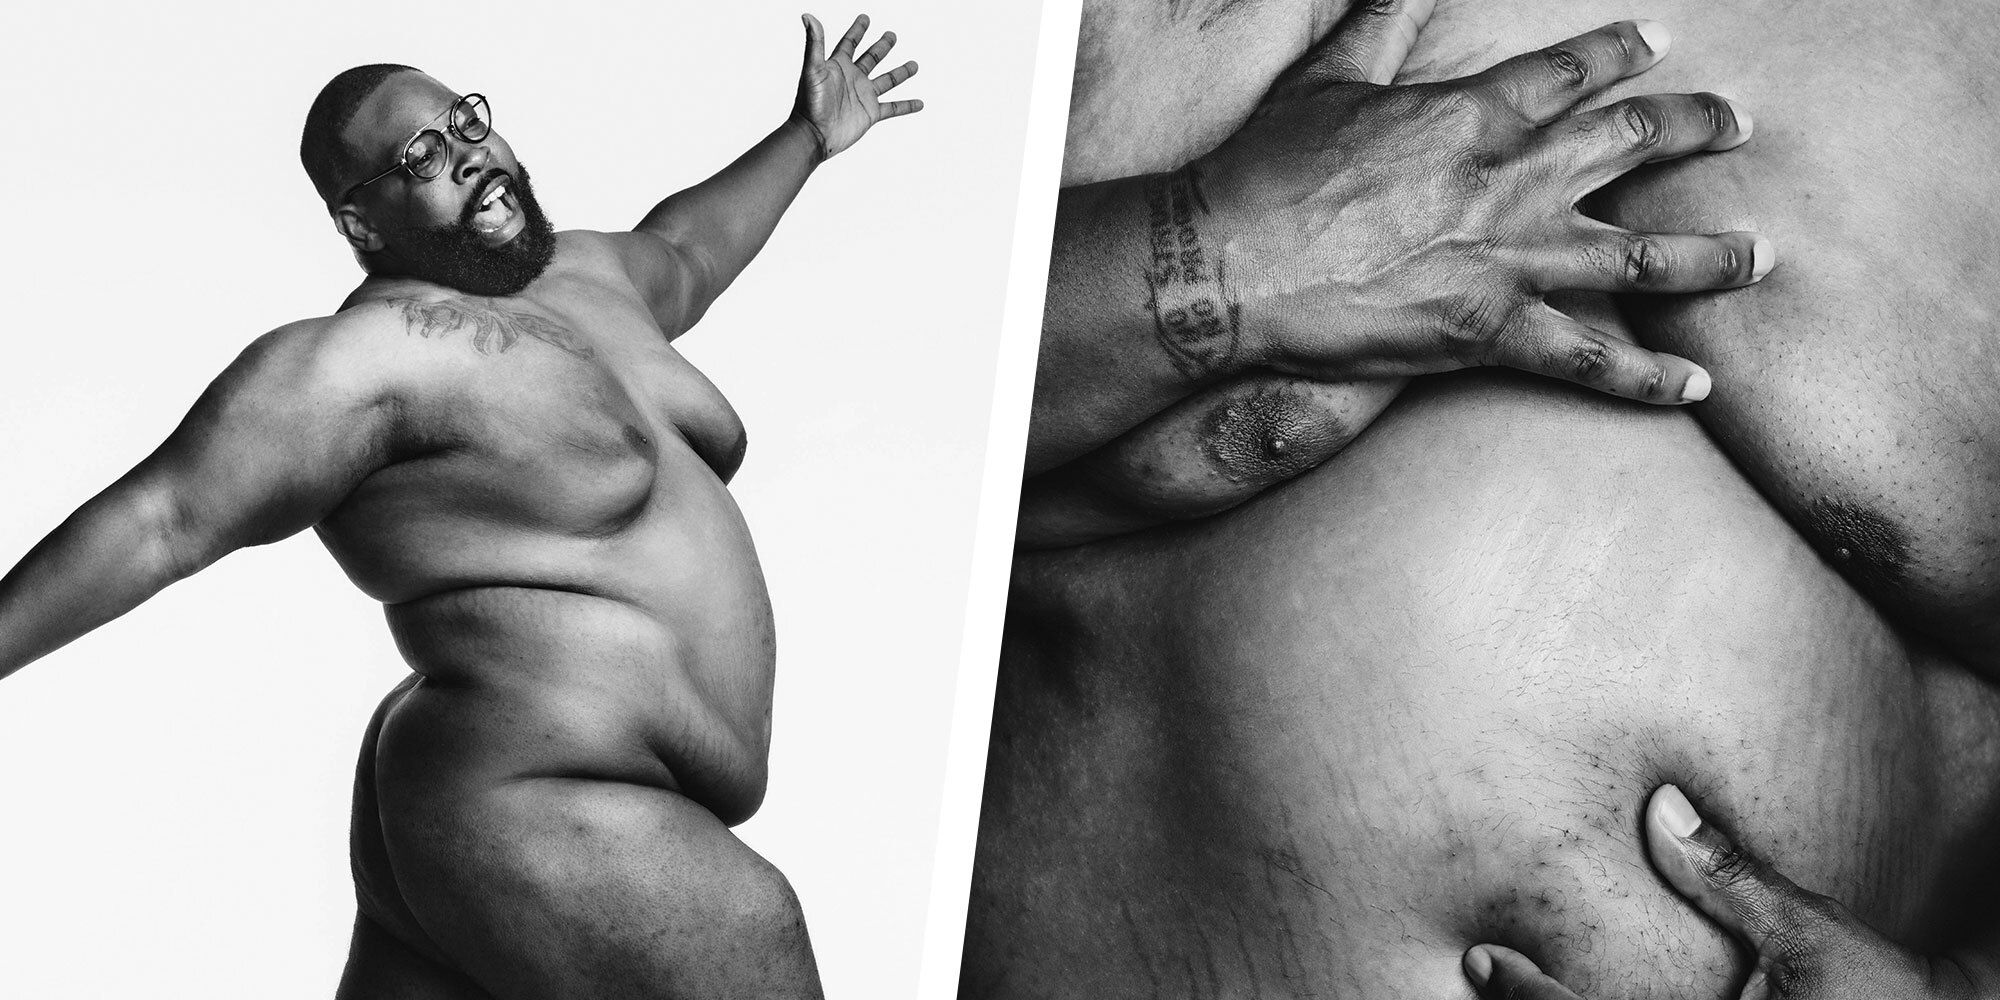 Martinus Evans, The 300-Pound Runner, Is Crushing Fitness Stereotypes